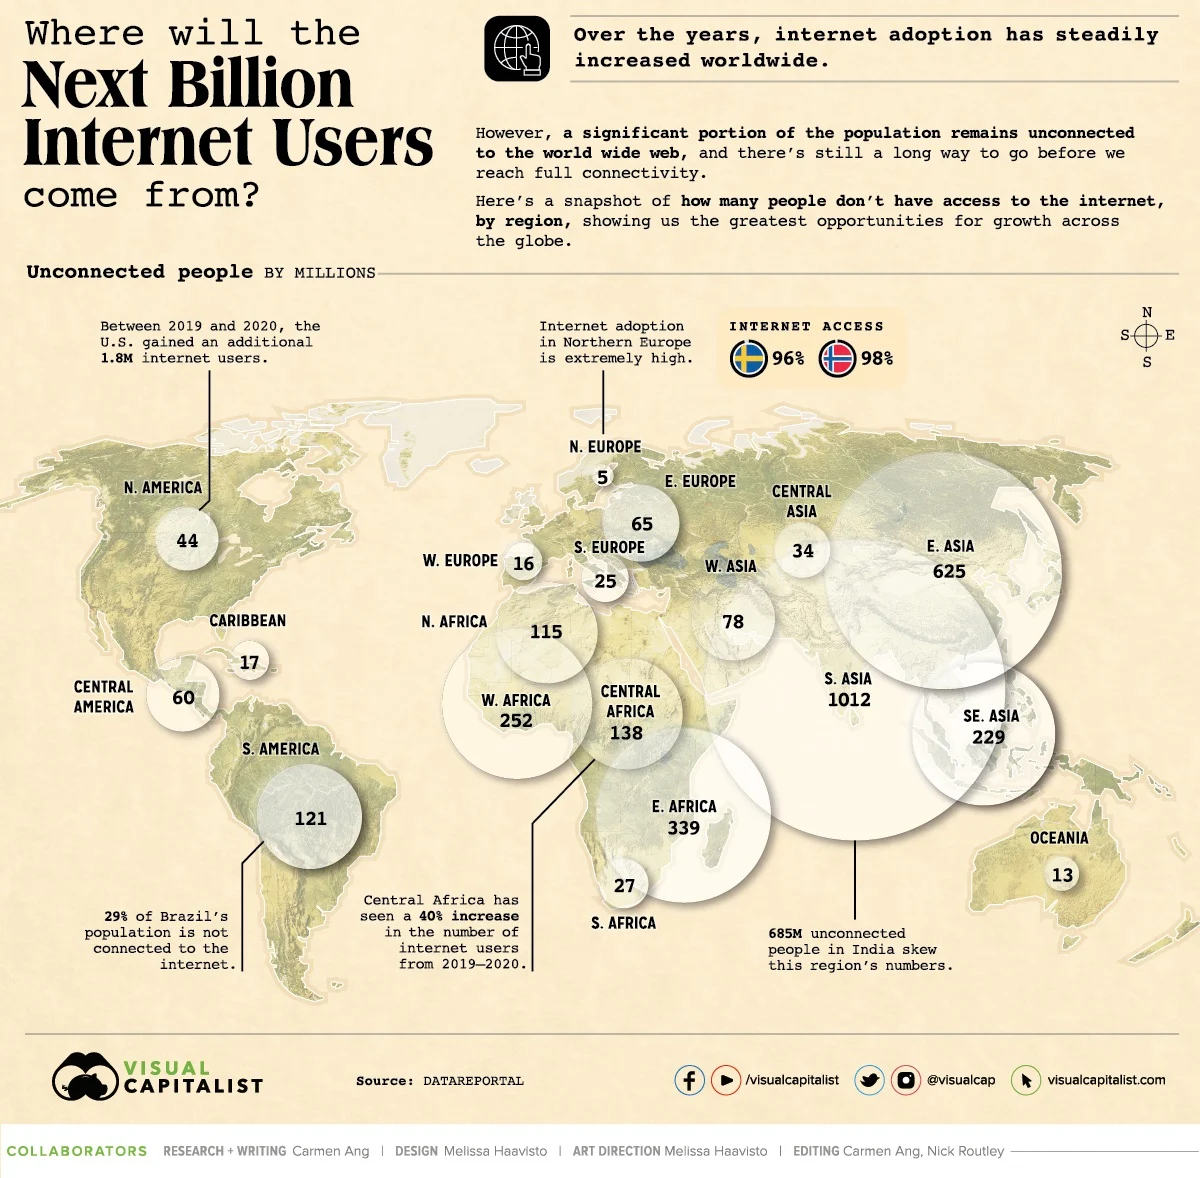 Where Will the Next Billion Internet Users Come From? - infographic